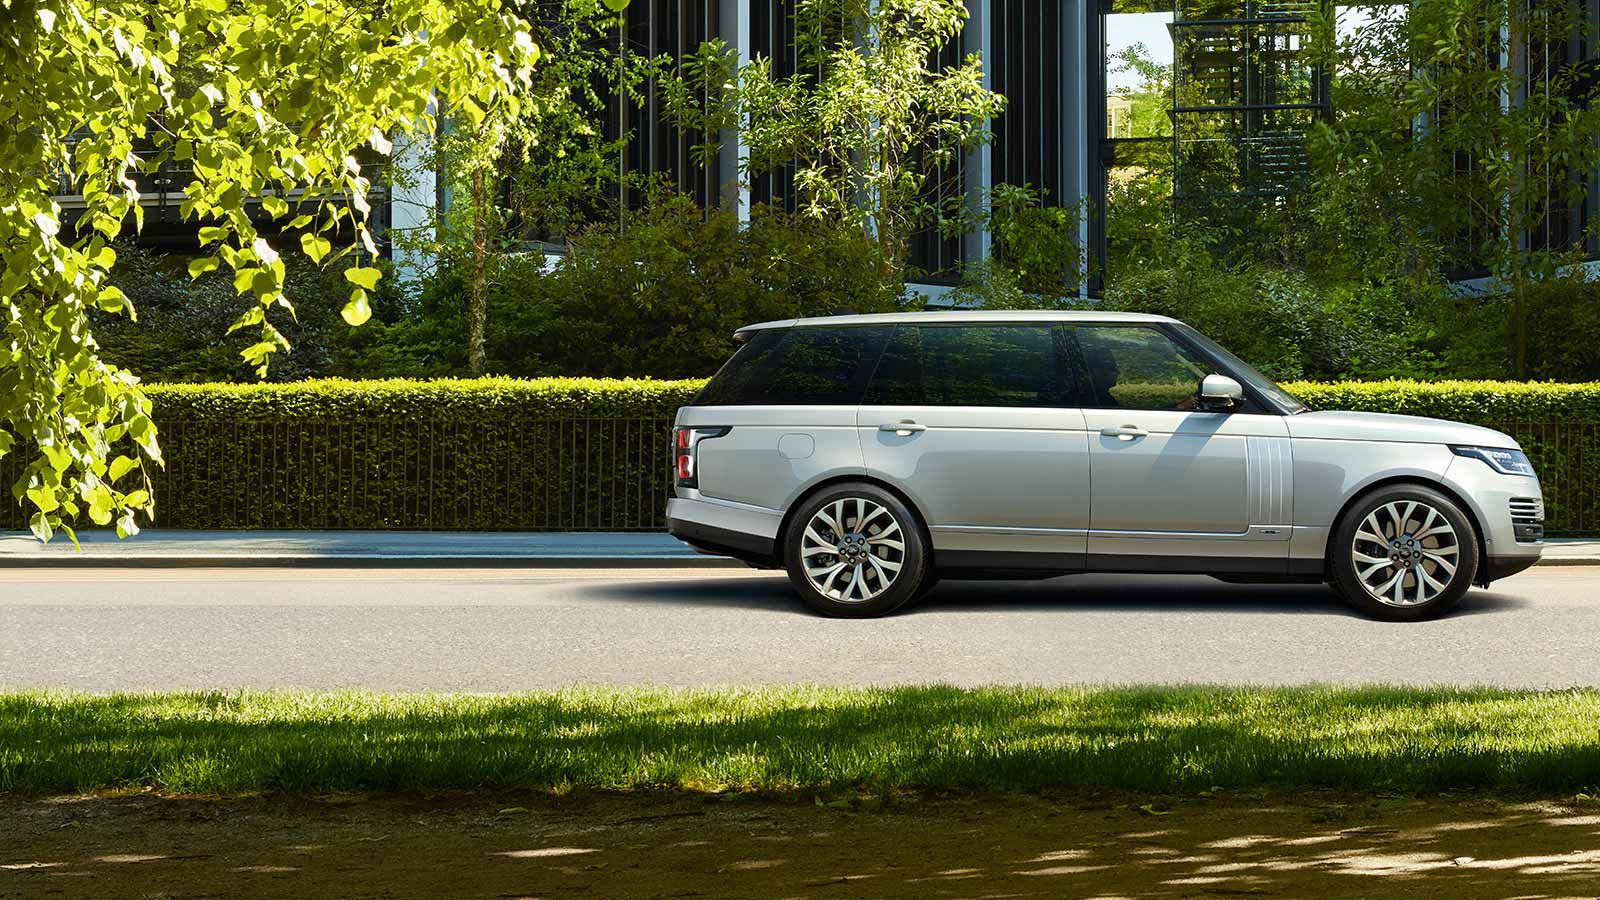 Range Rover Autobiography Lwb  : Discover The Range Rover Autobiography, Designed And Crafted To Perfection To Combine Capability Autobiography.